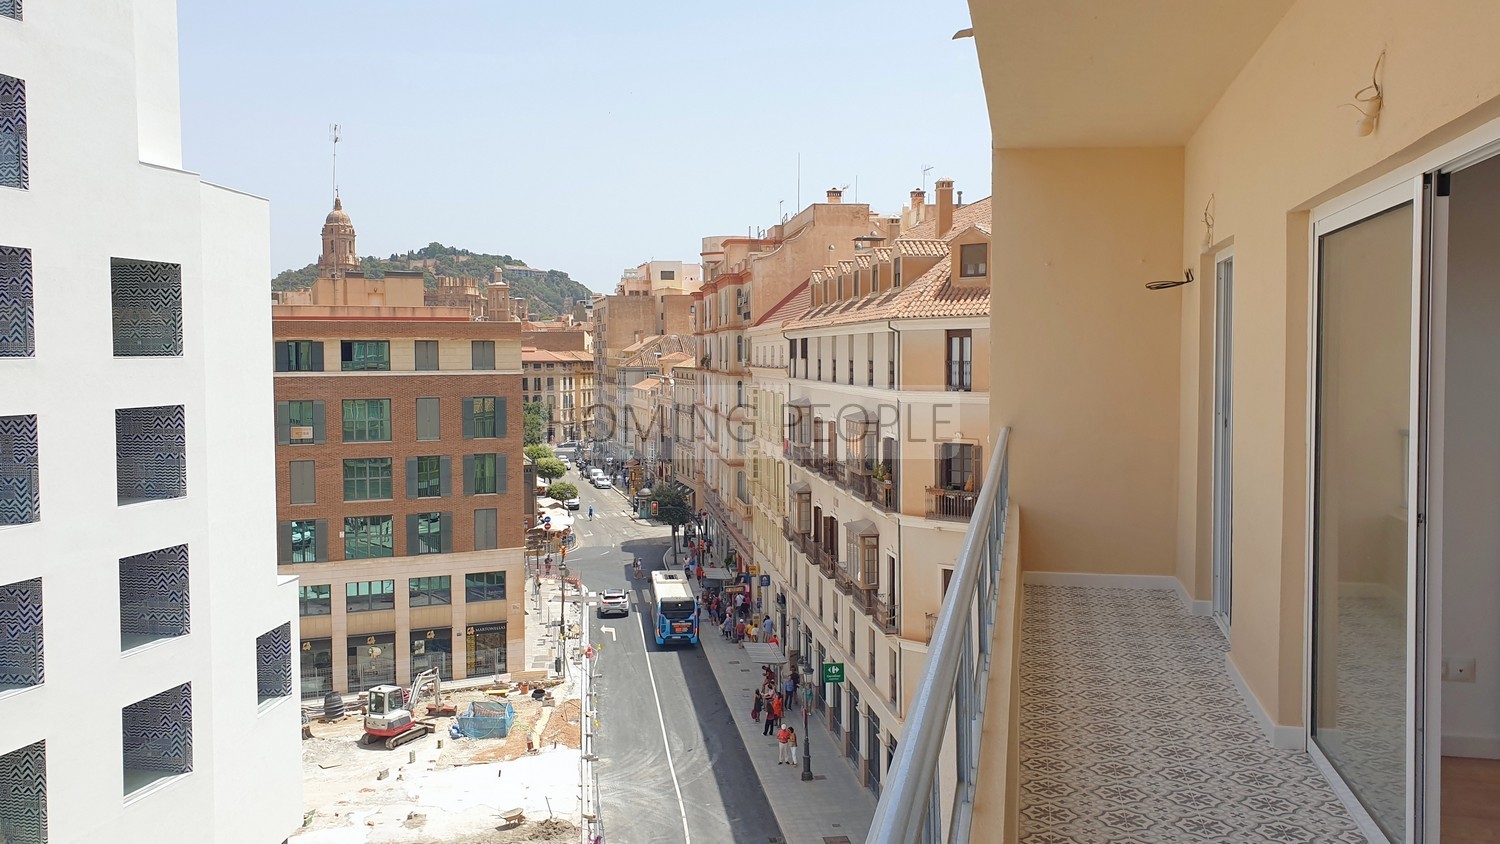 RENTED OUT_Freshly-refurbished, unfurnished flat with a terrace, located close to the main market!